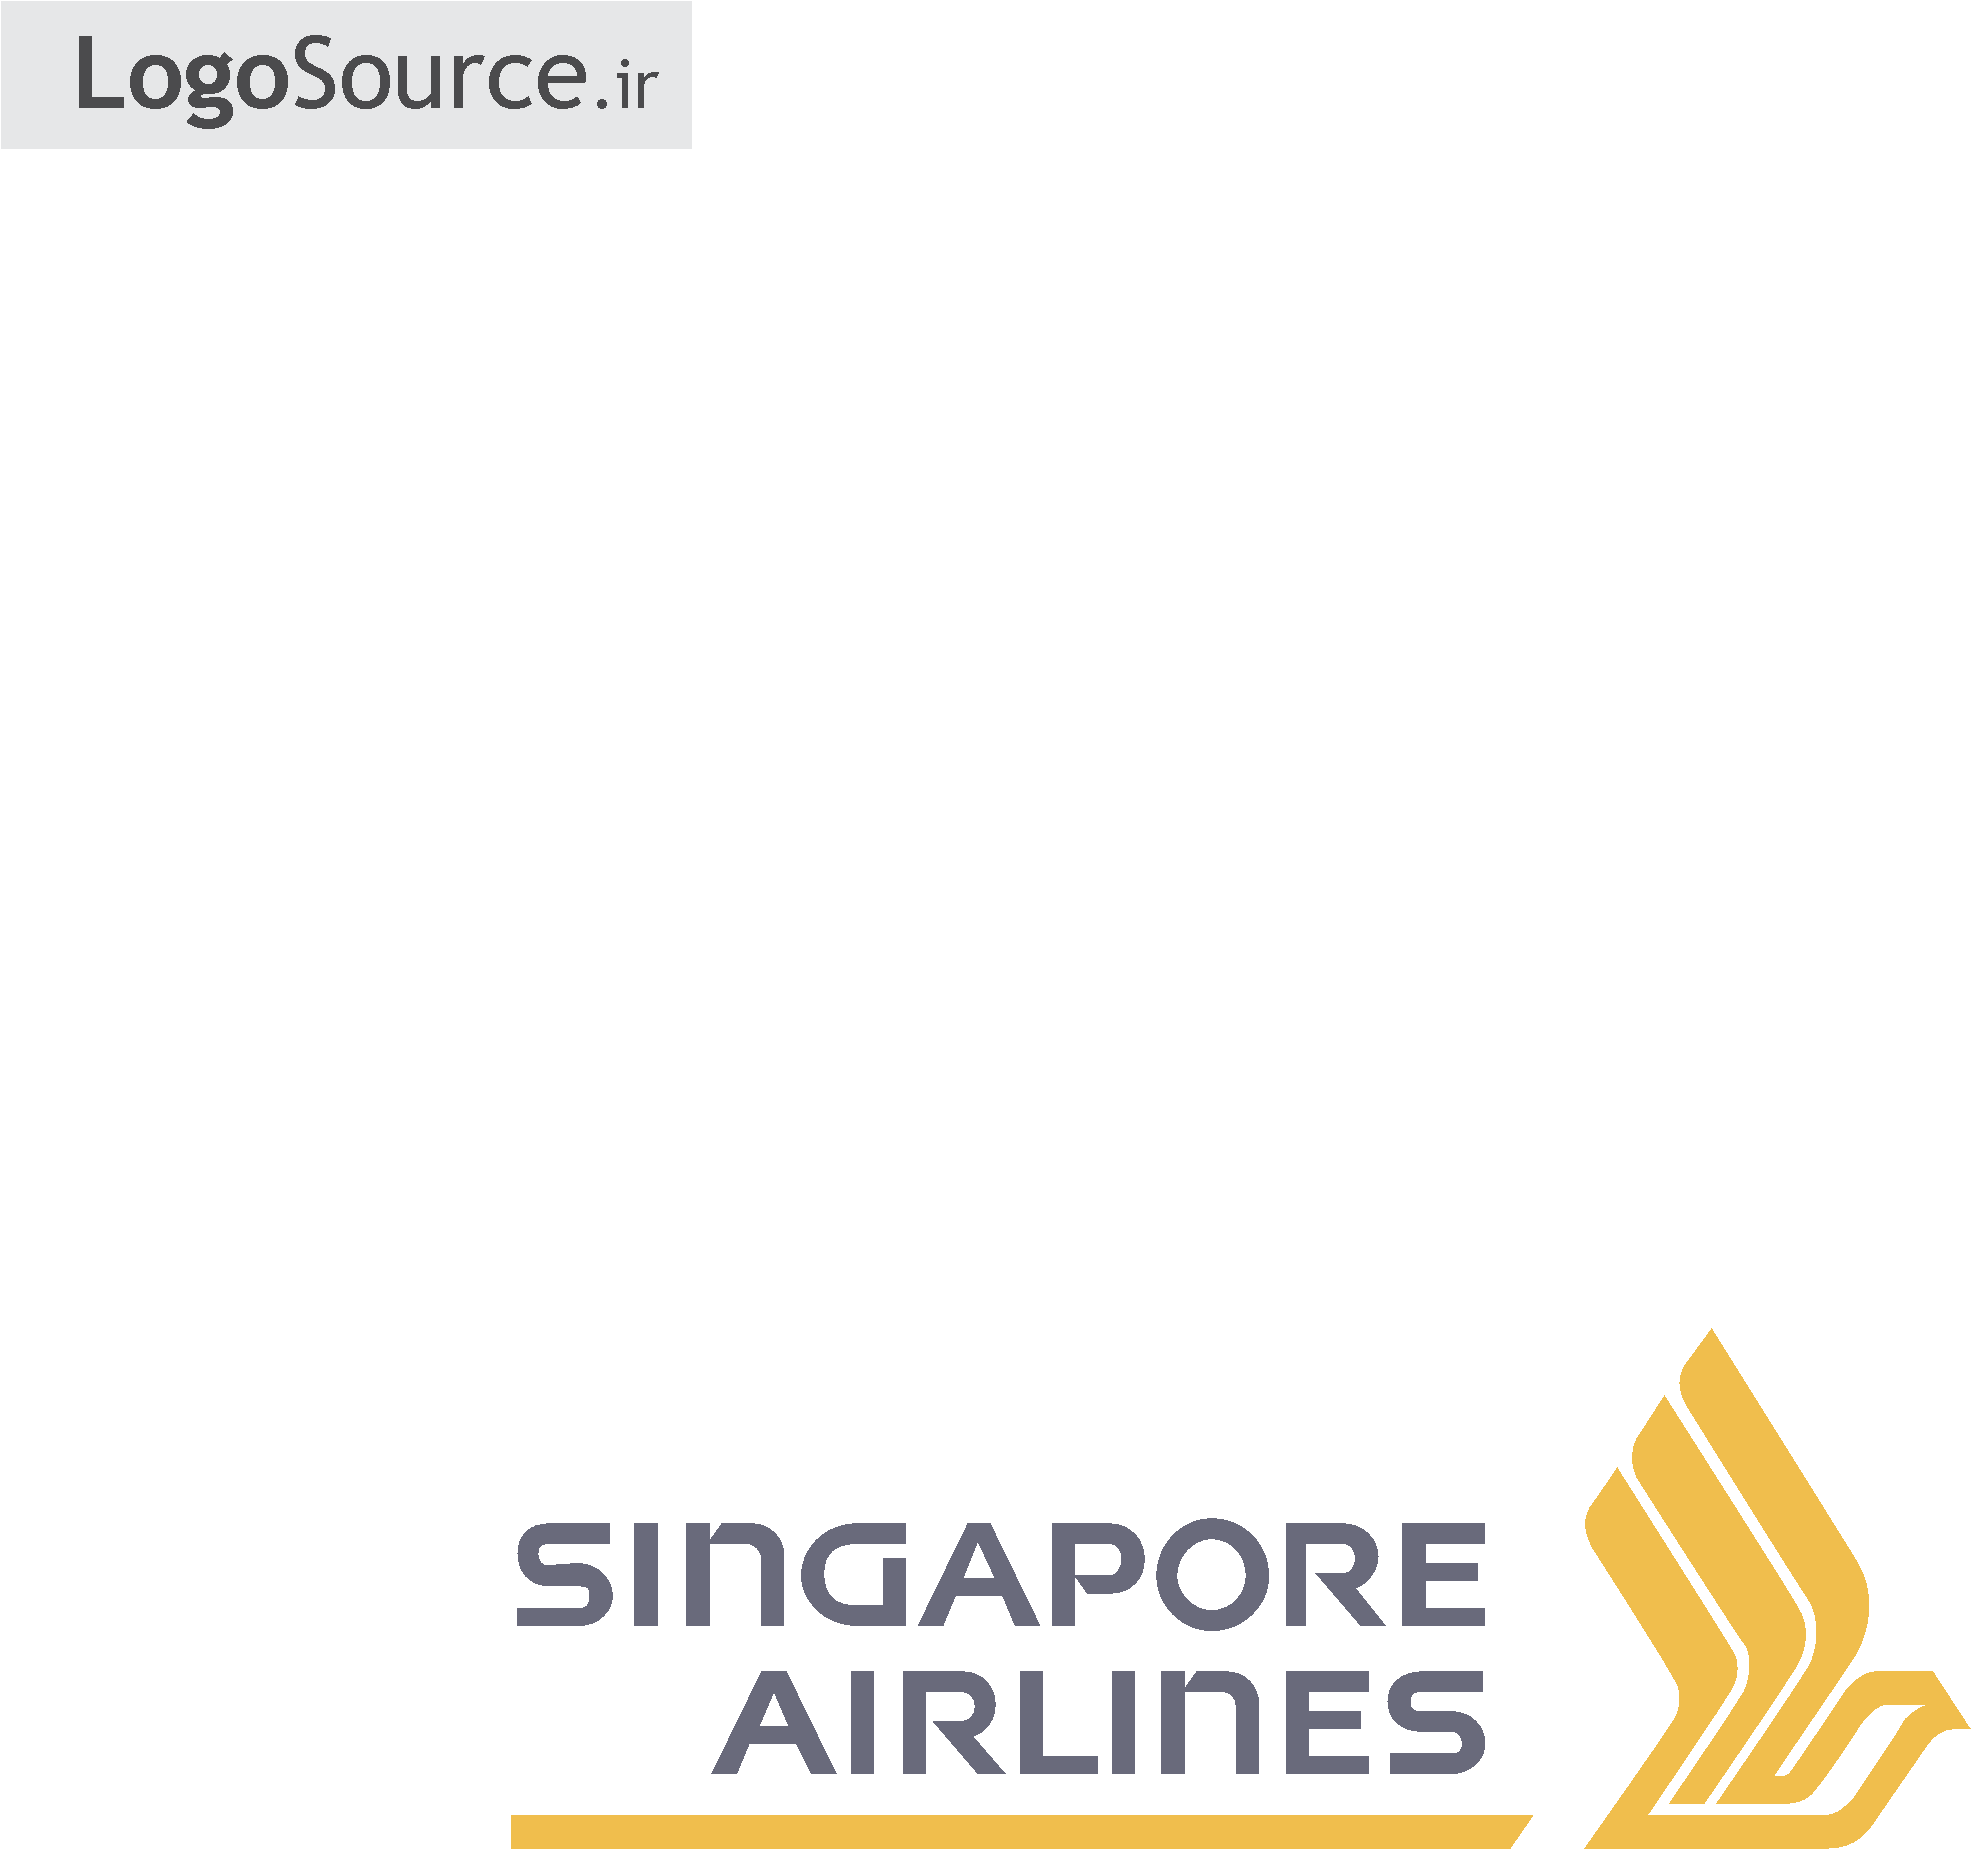 File Png - Singapore Airlines (2480x3507)